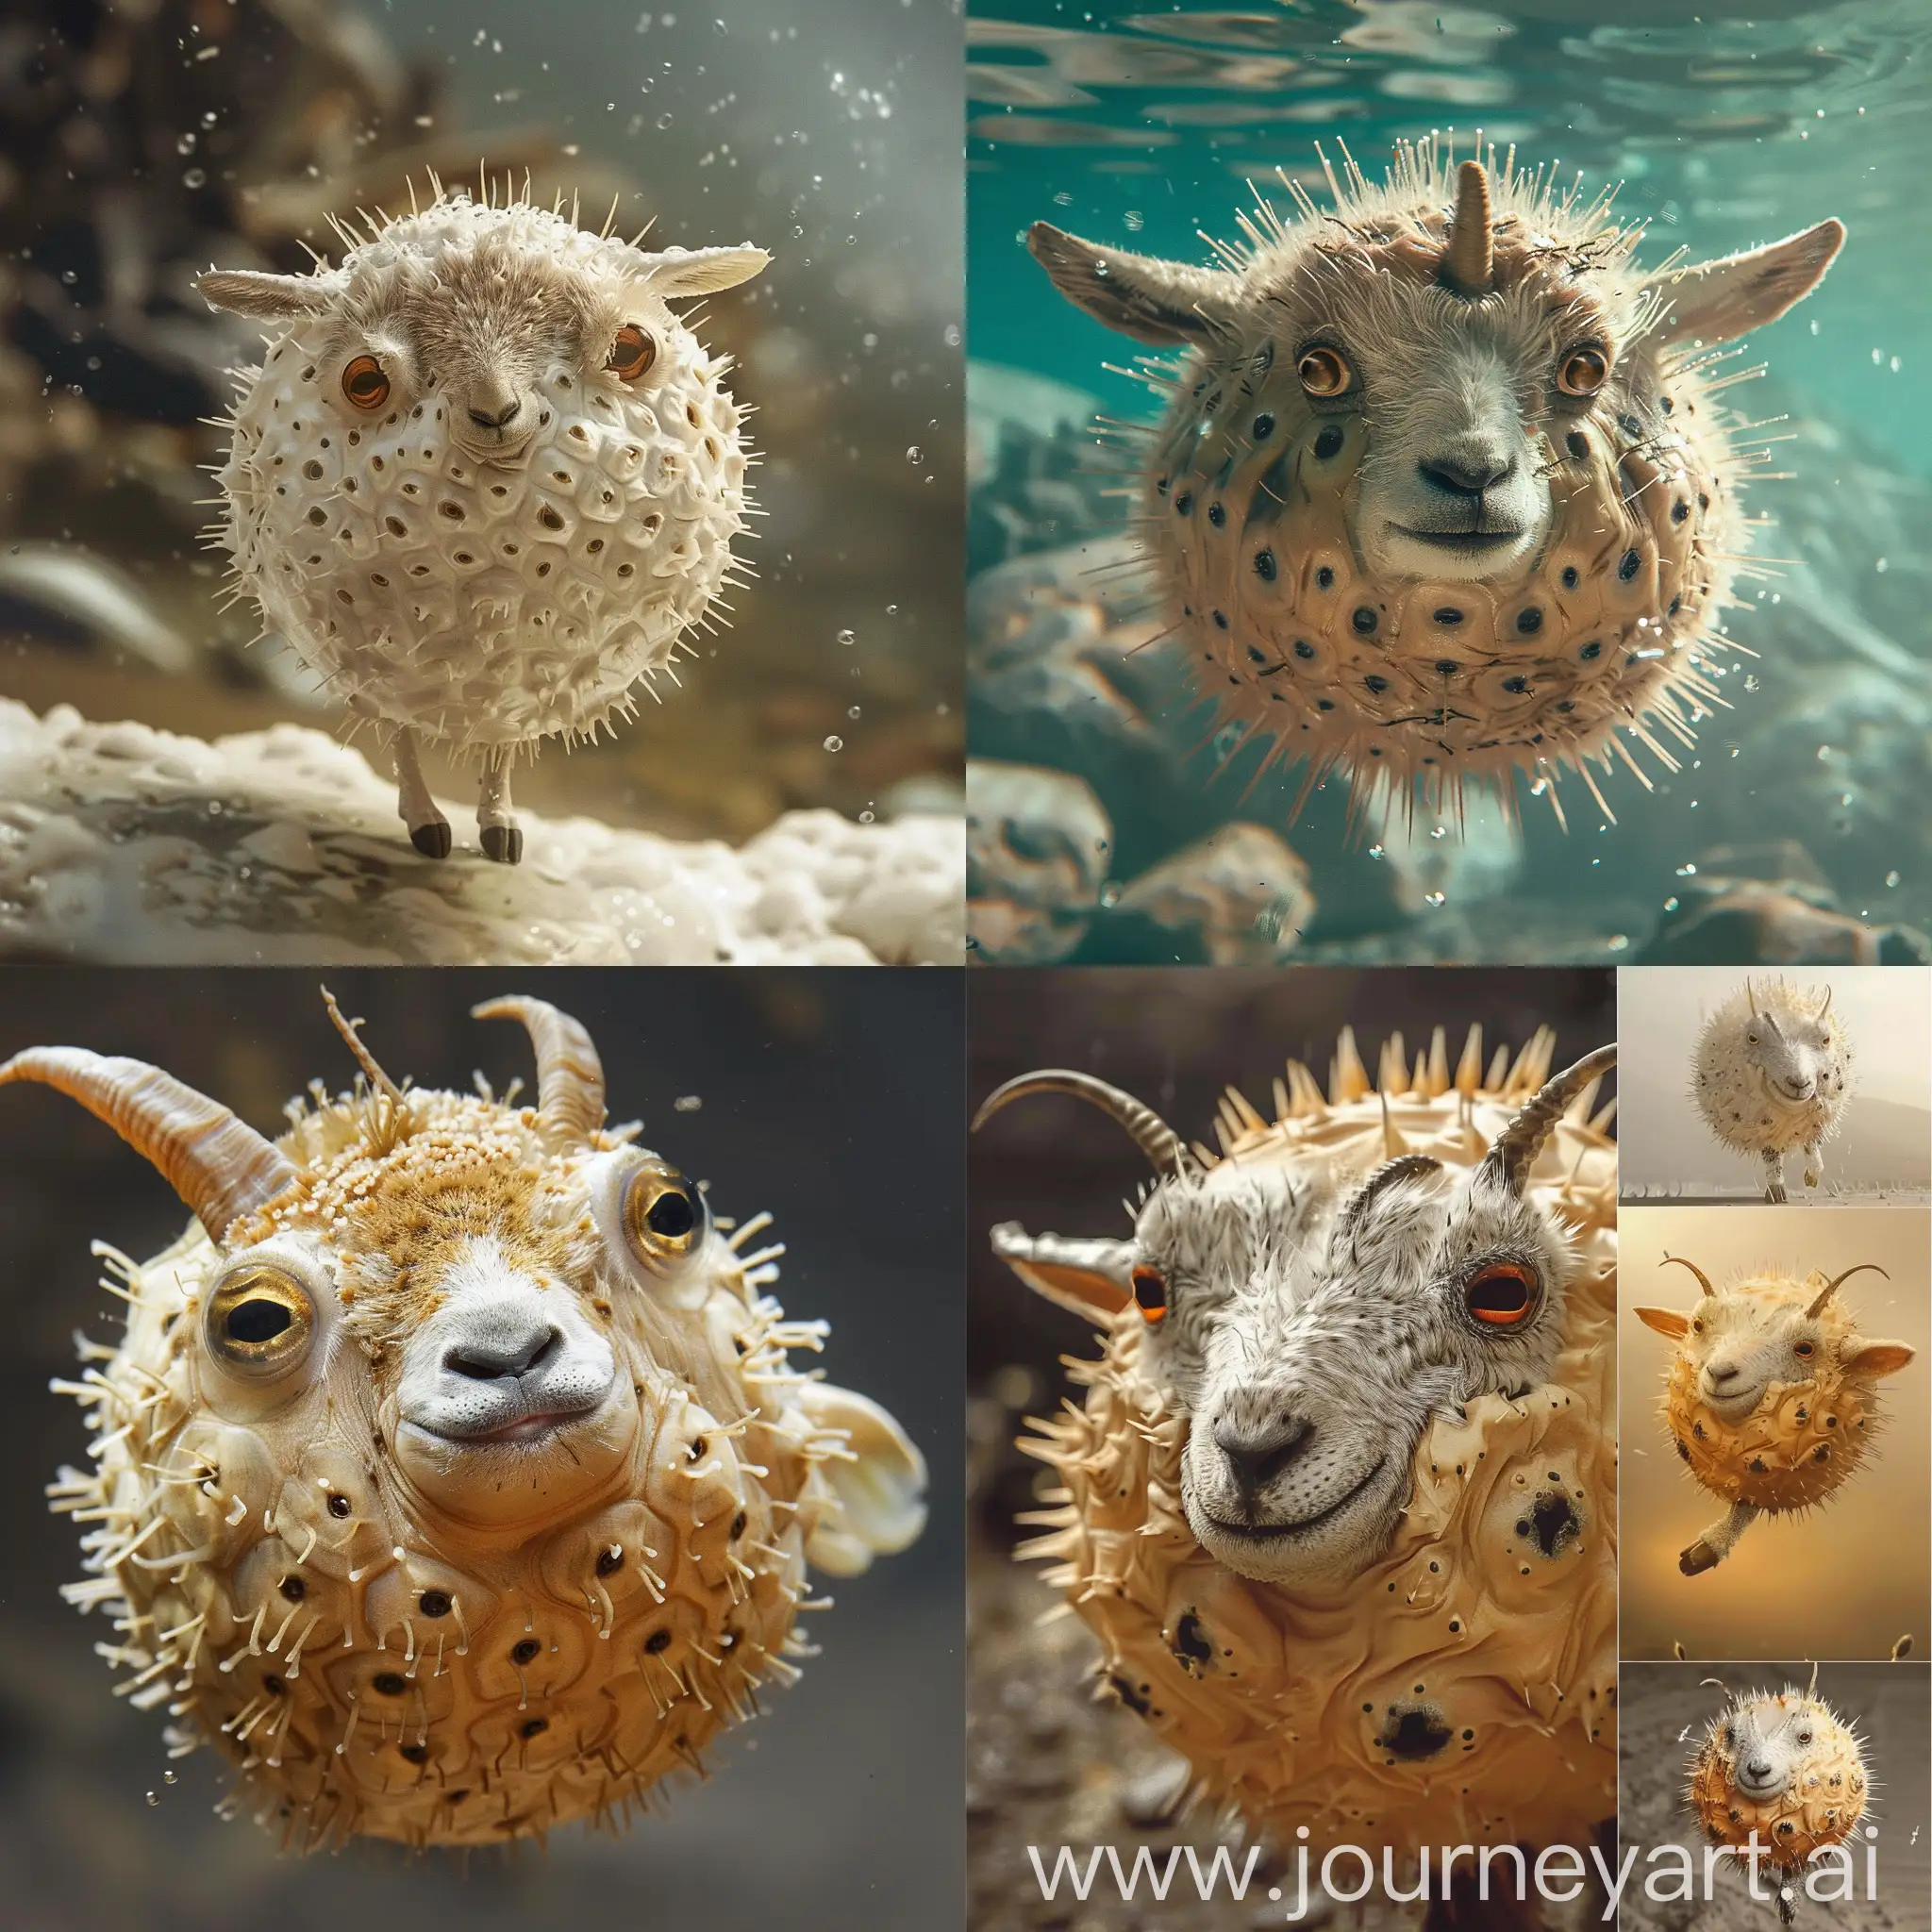 Whimsical-Fusion-Pufferfish-and-Goat-Hybrid